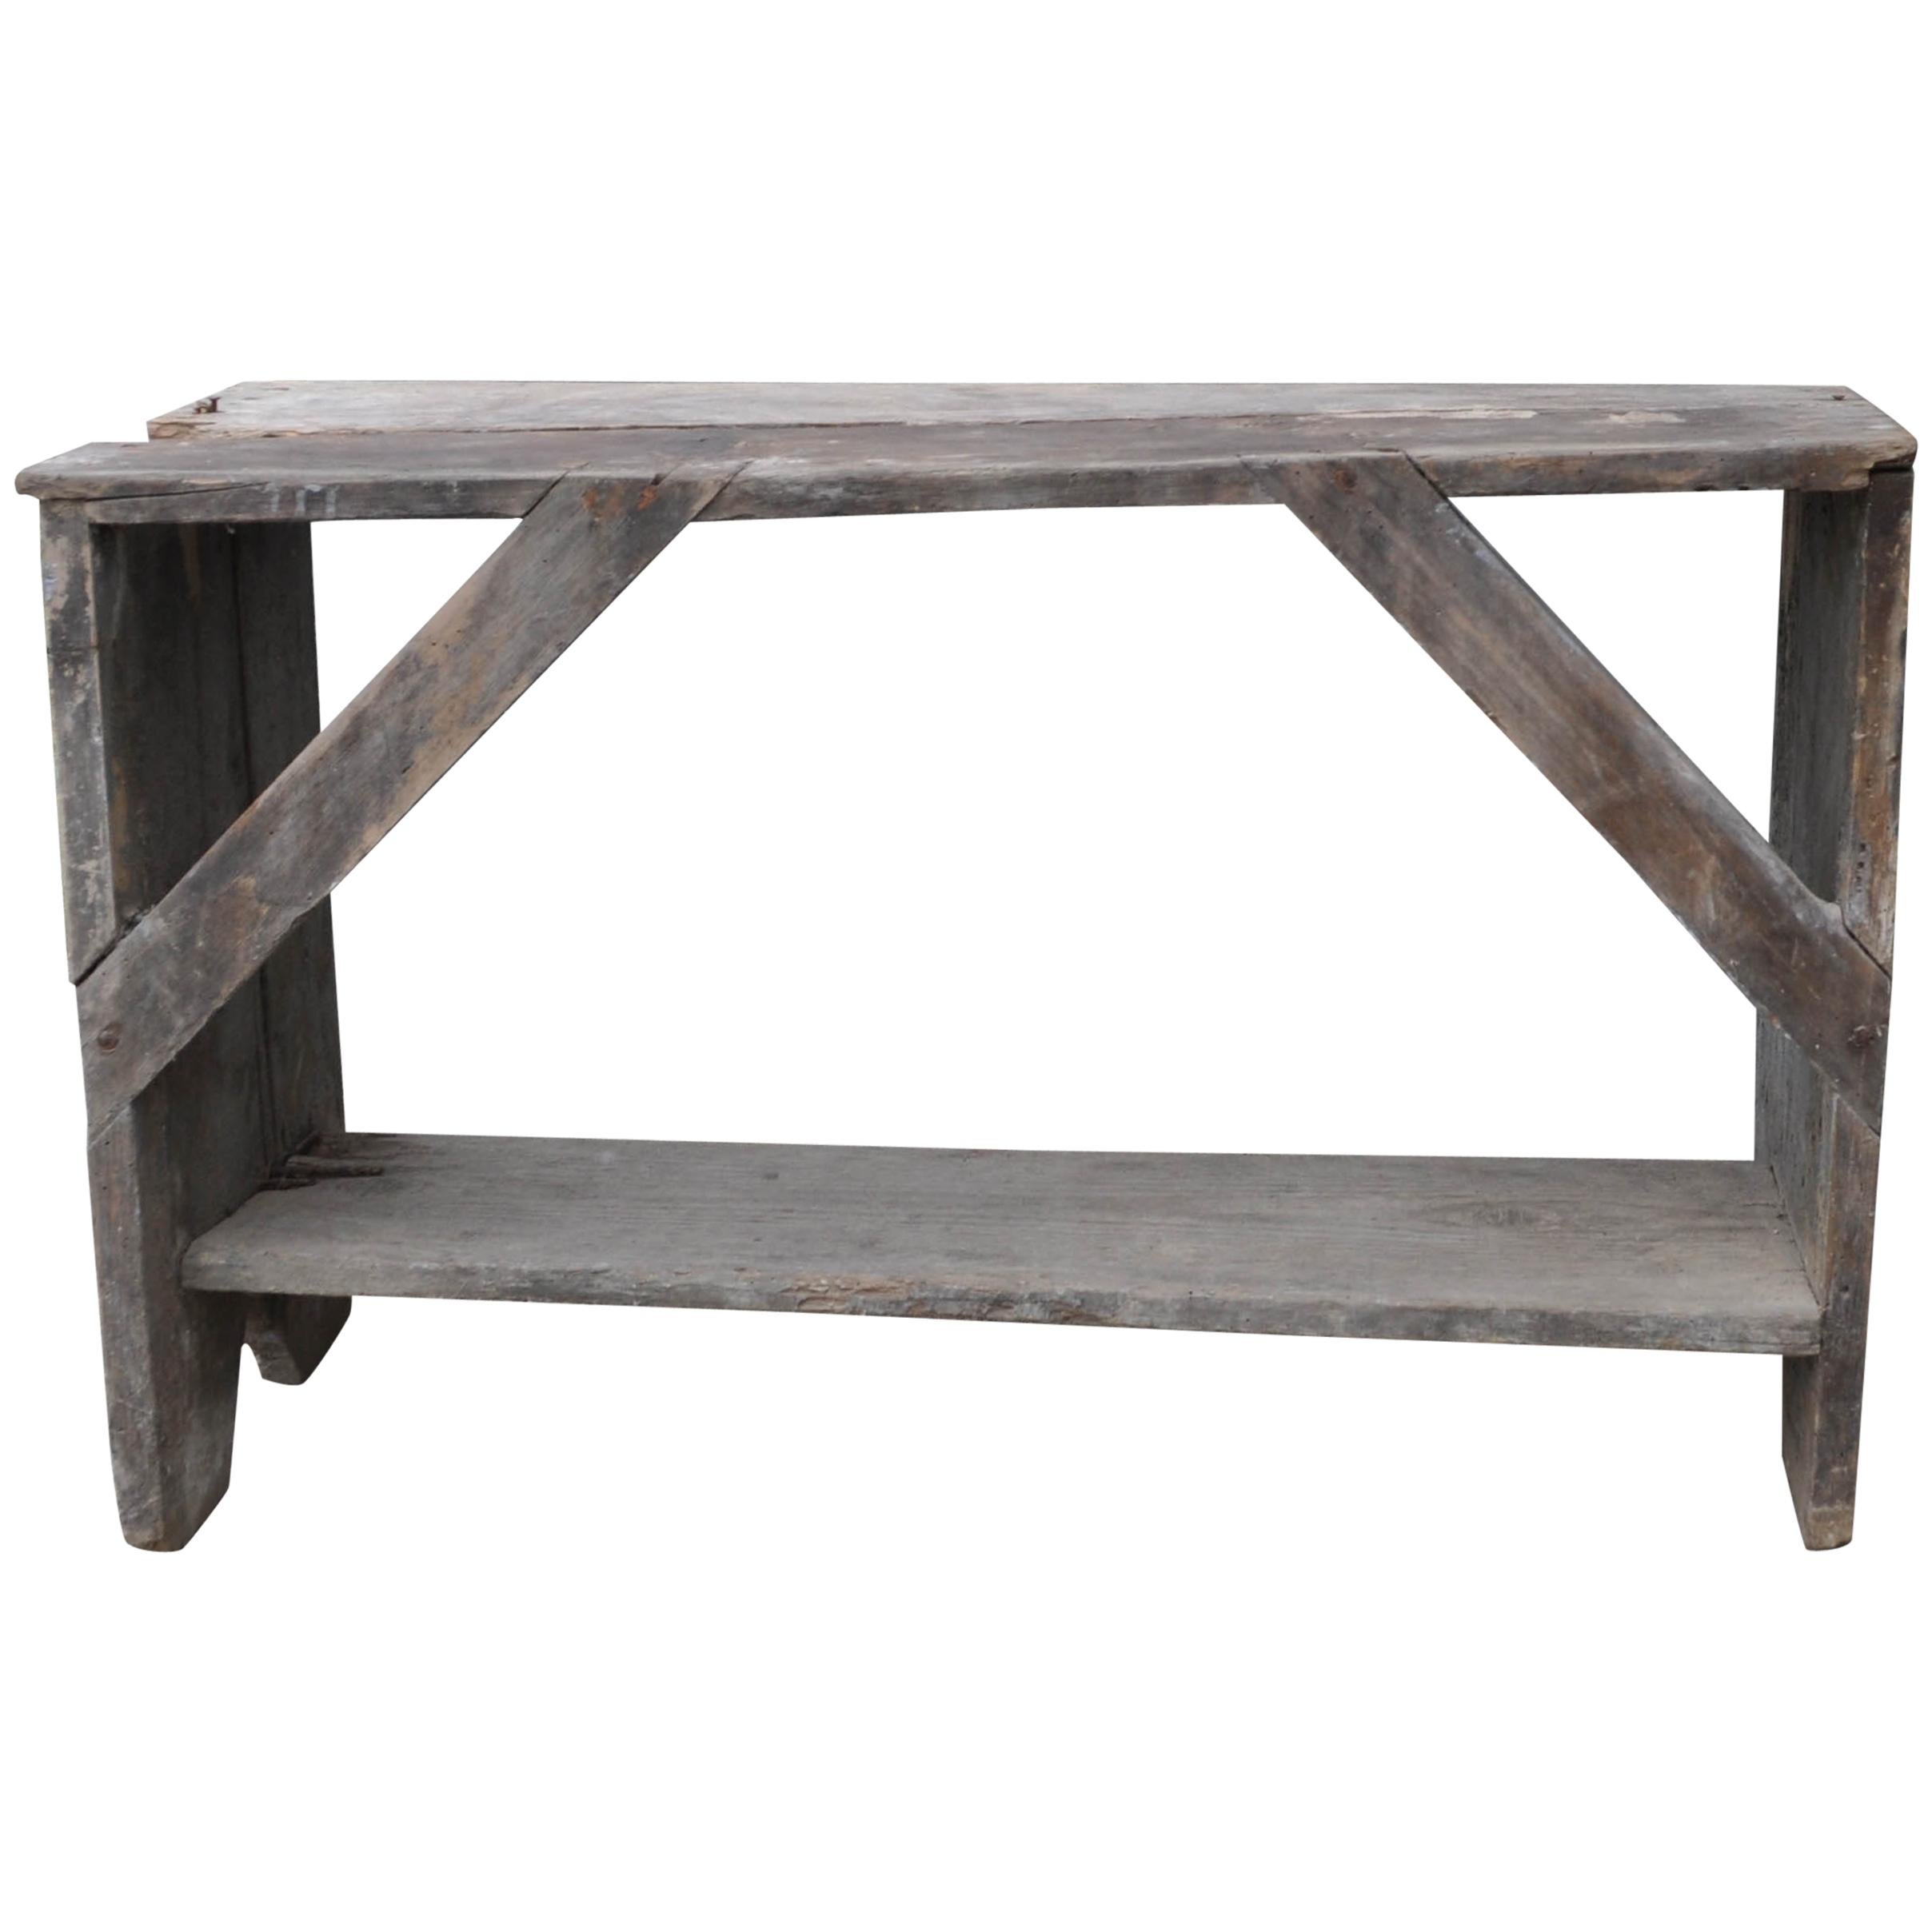 Hungarian Water Bench with Worn Patina For Sale